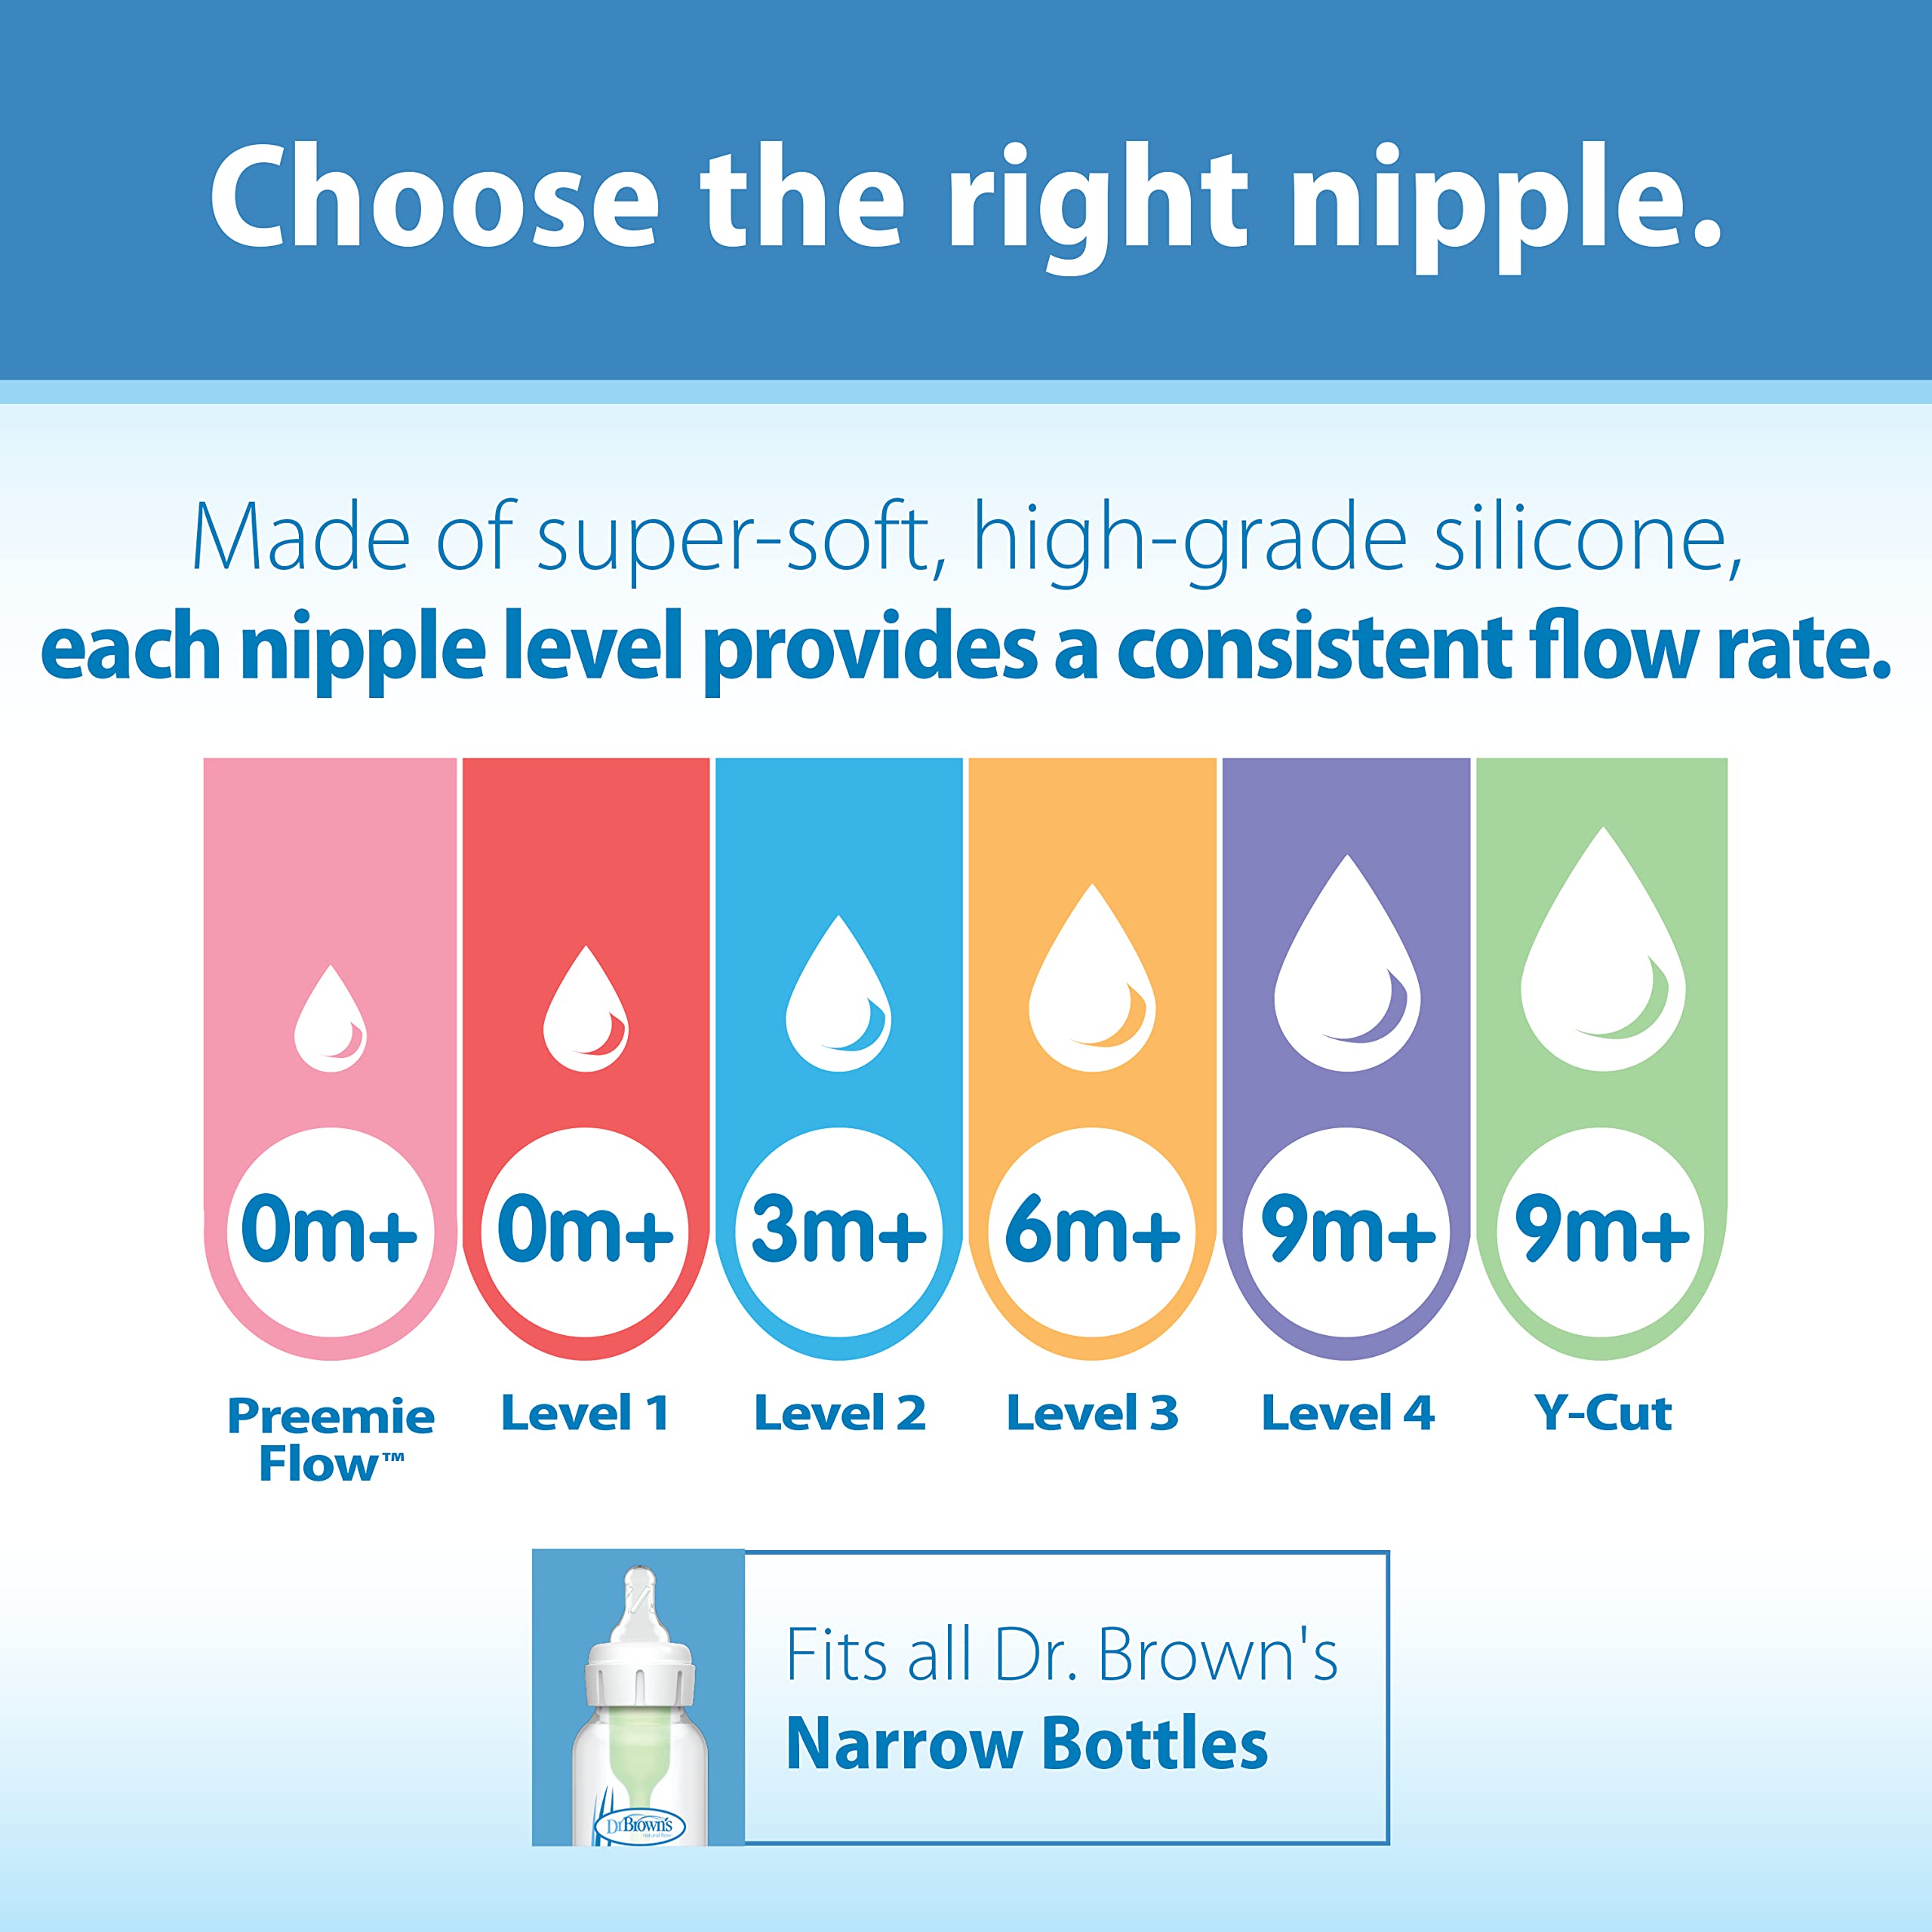 Dr. Brown’s Natural Flow Level 2 Narrow Baby Bottle Silicone Nipple, Medium Flow, 3m+, 100% Silicone Bottle Nipple, 6 Count